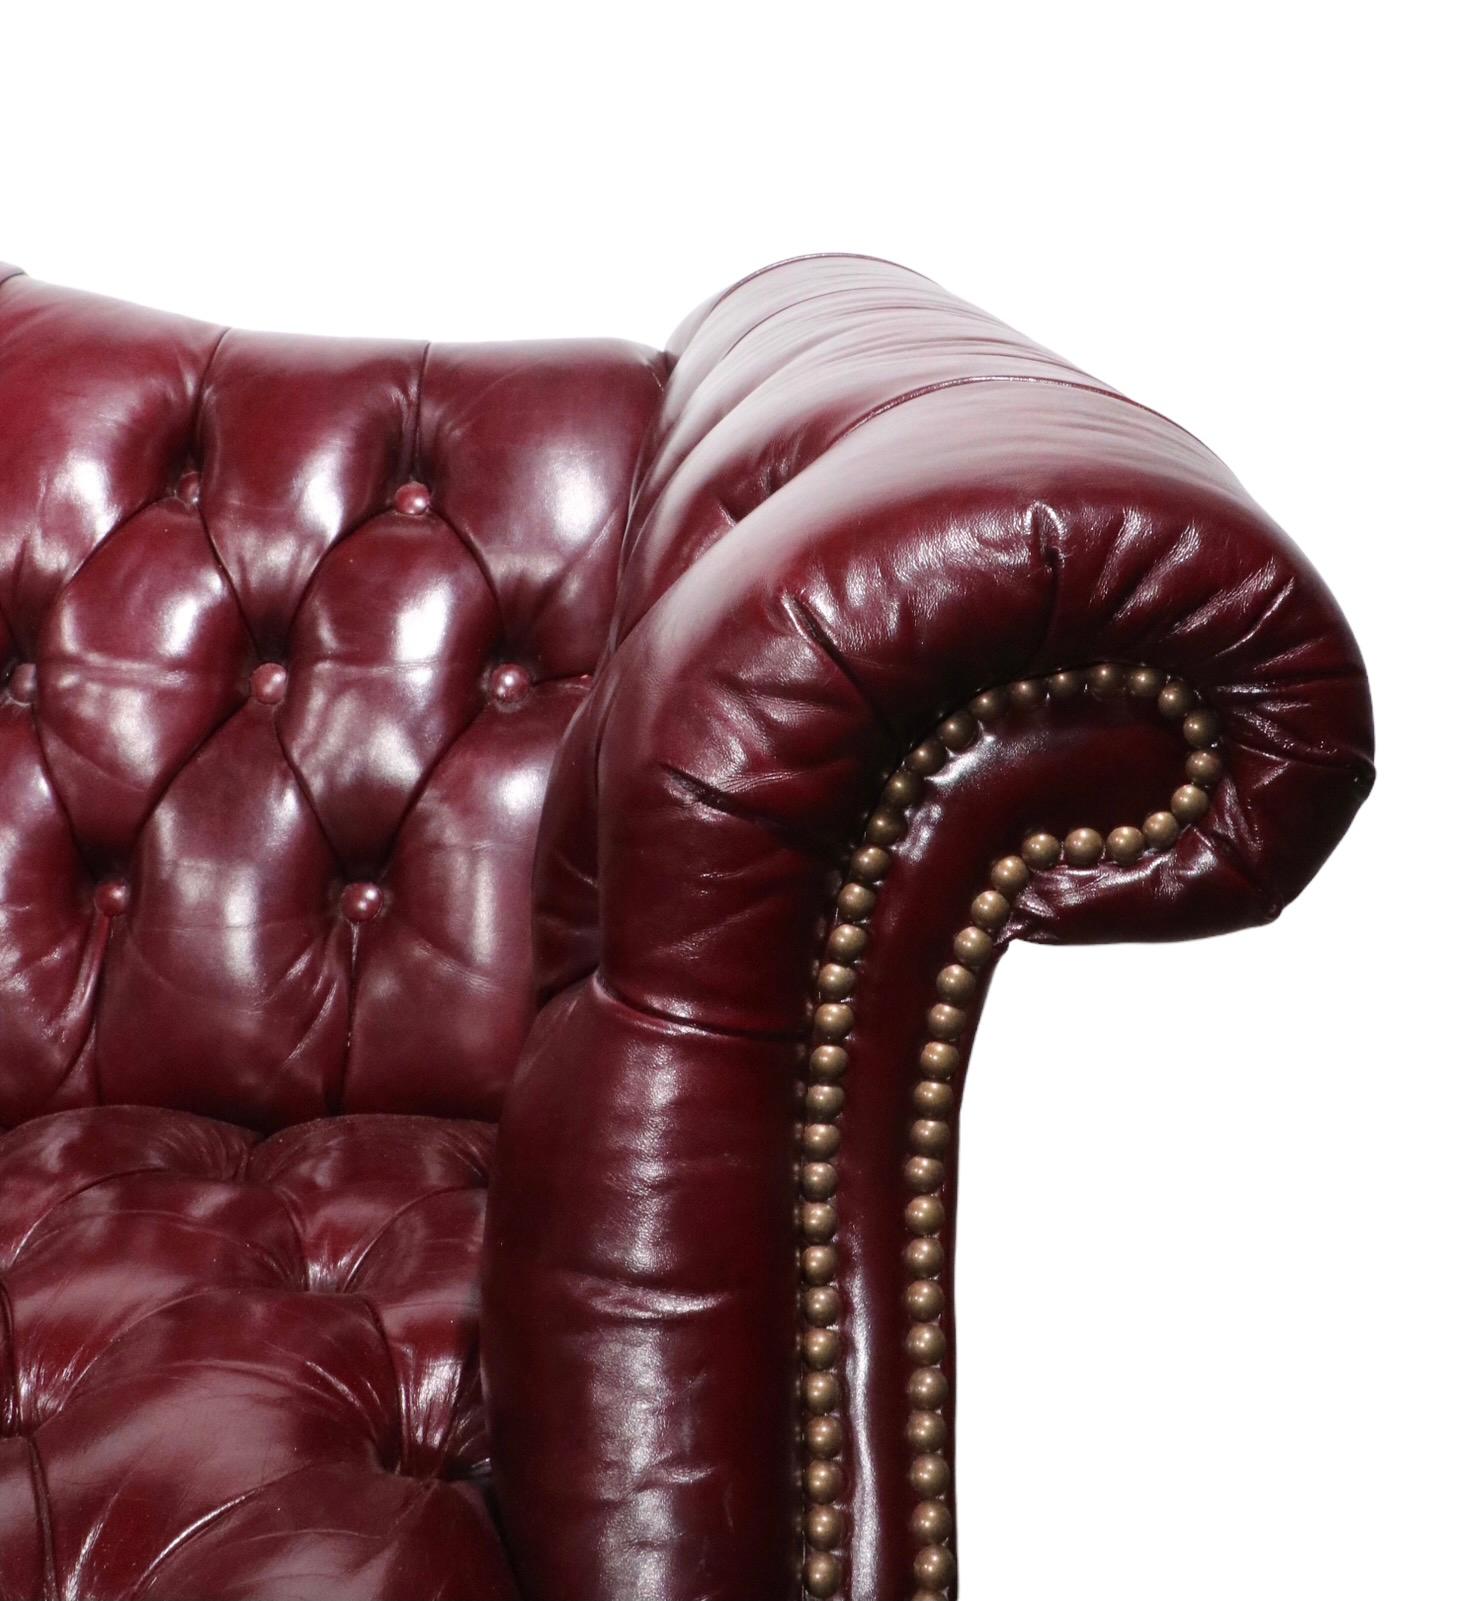 Chippendale  Tufted Burgundy  Leather Chesterfield Sofa c 1950/1960's For Sale